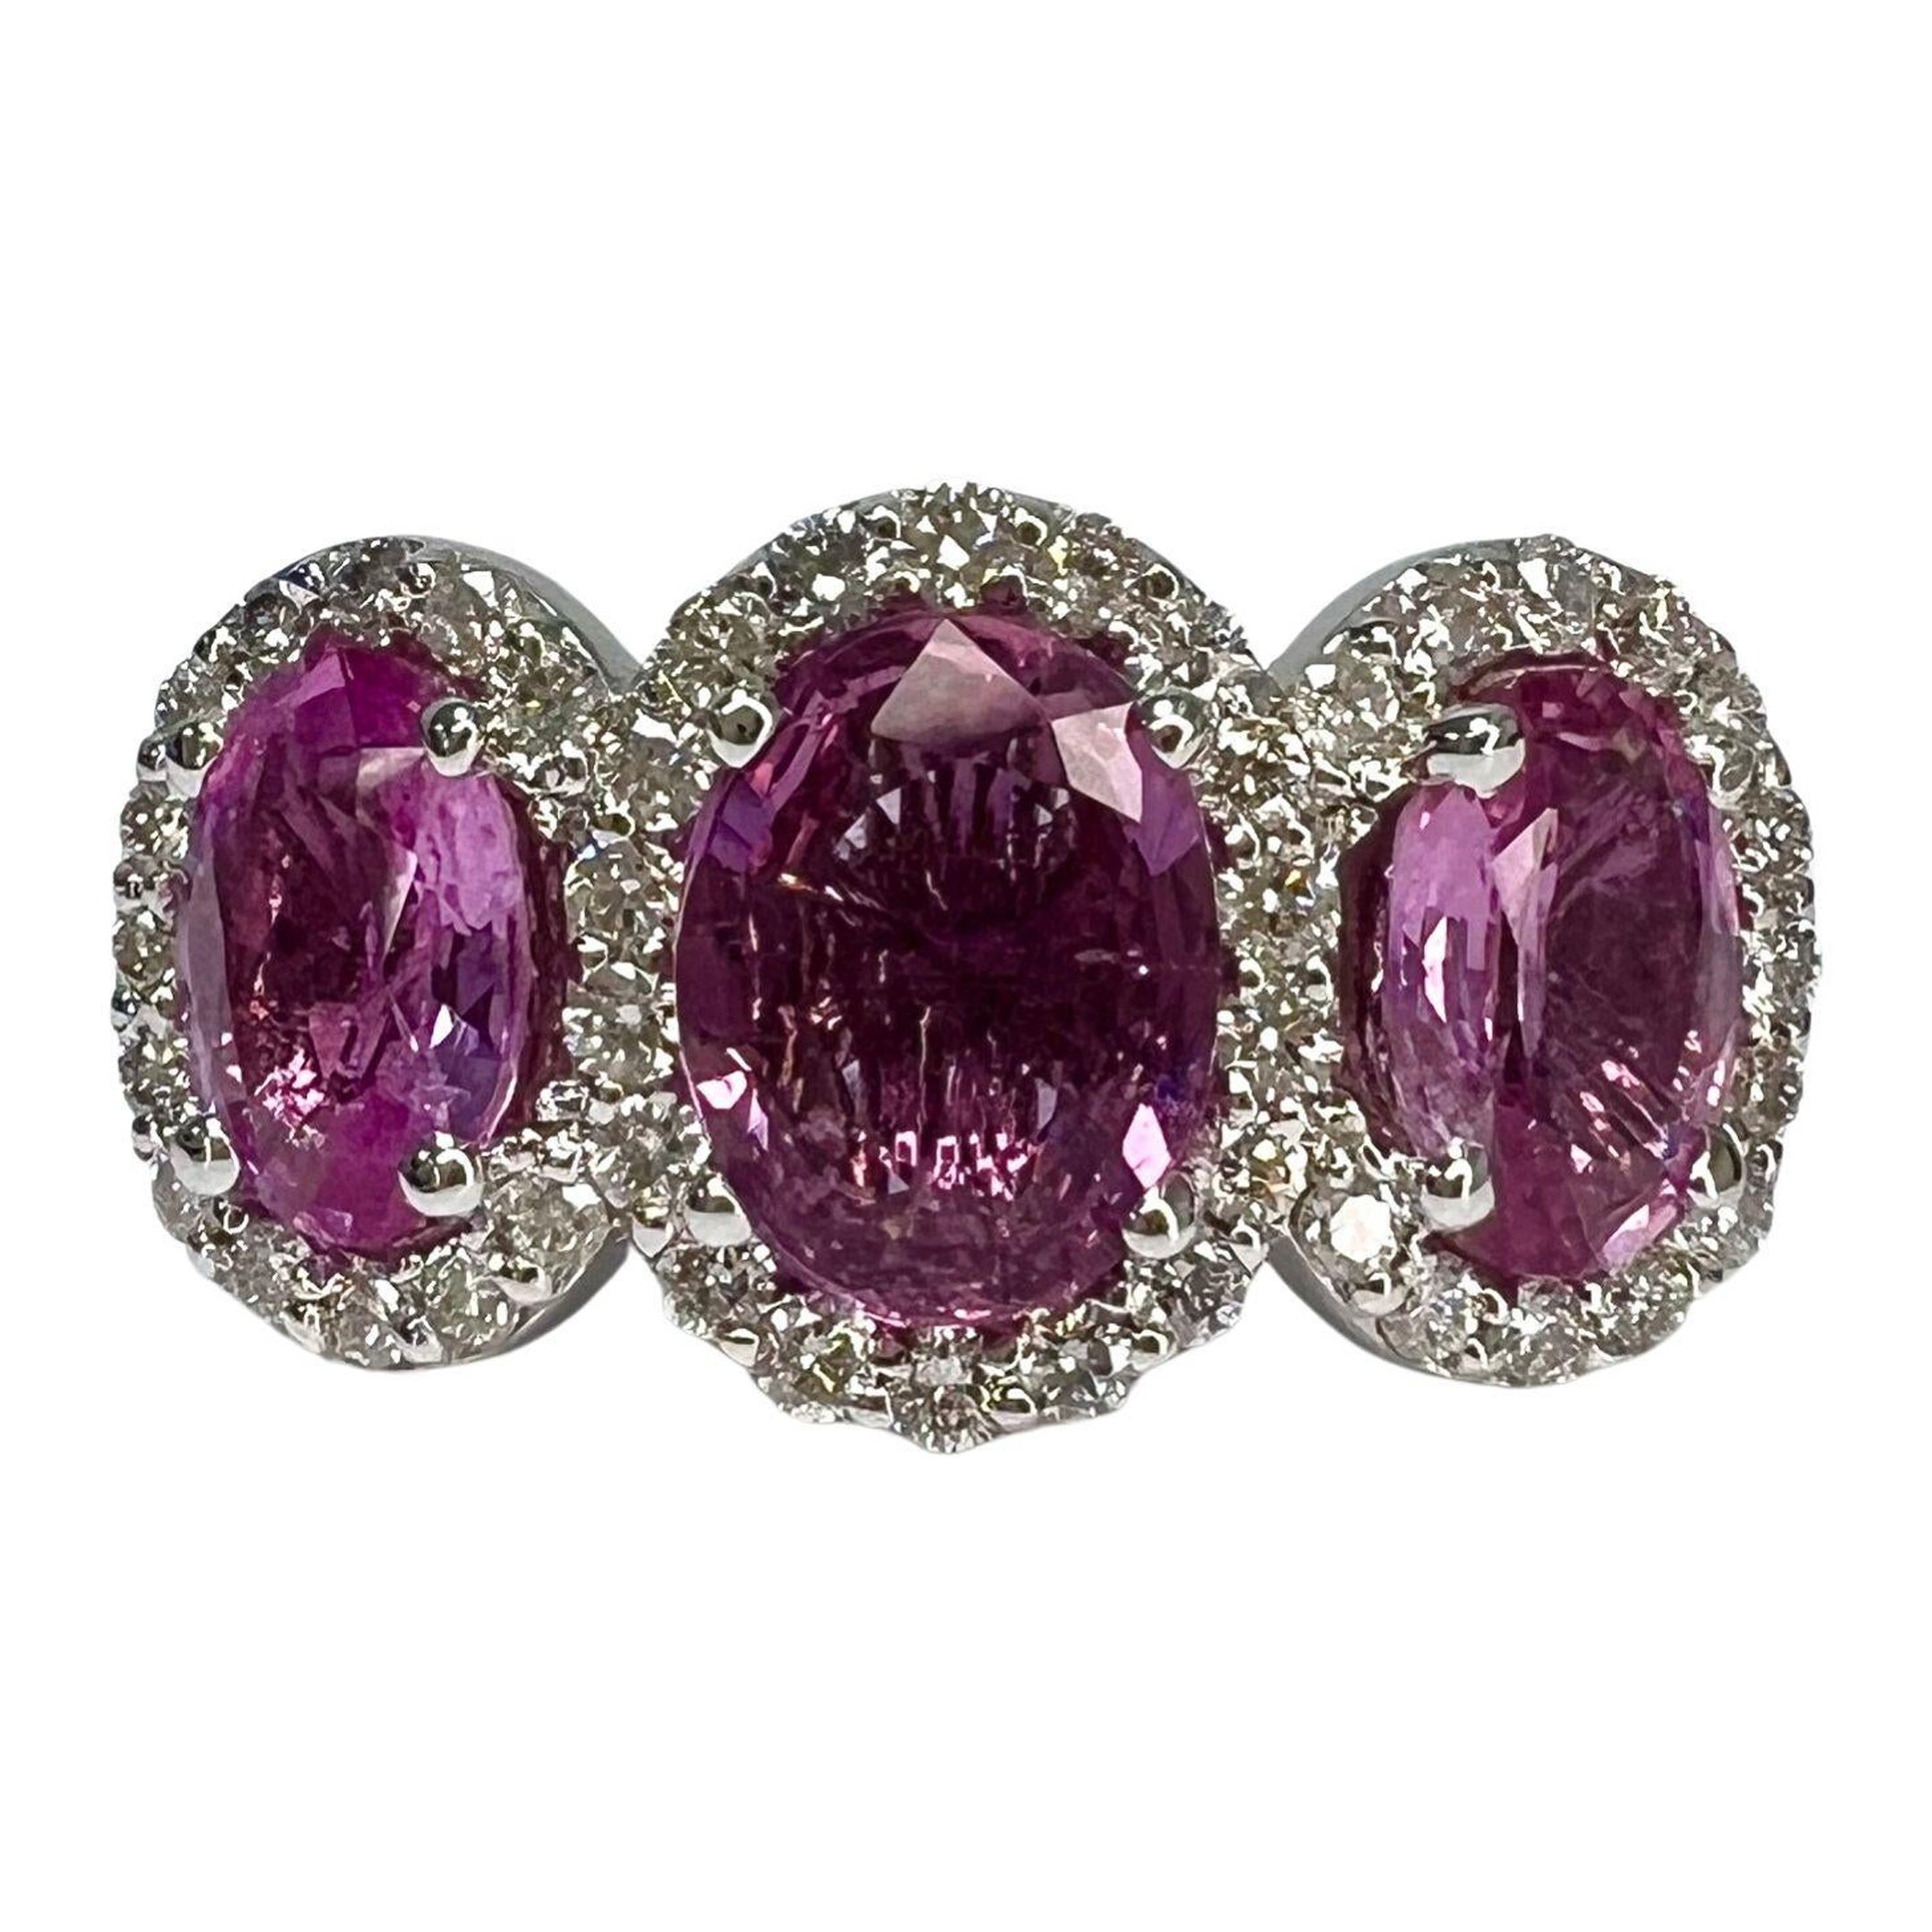 2.7 Carat Pink Sapphire Three Stone Halo Ring, 18k White Gold For Sale